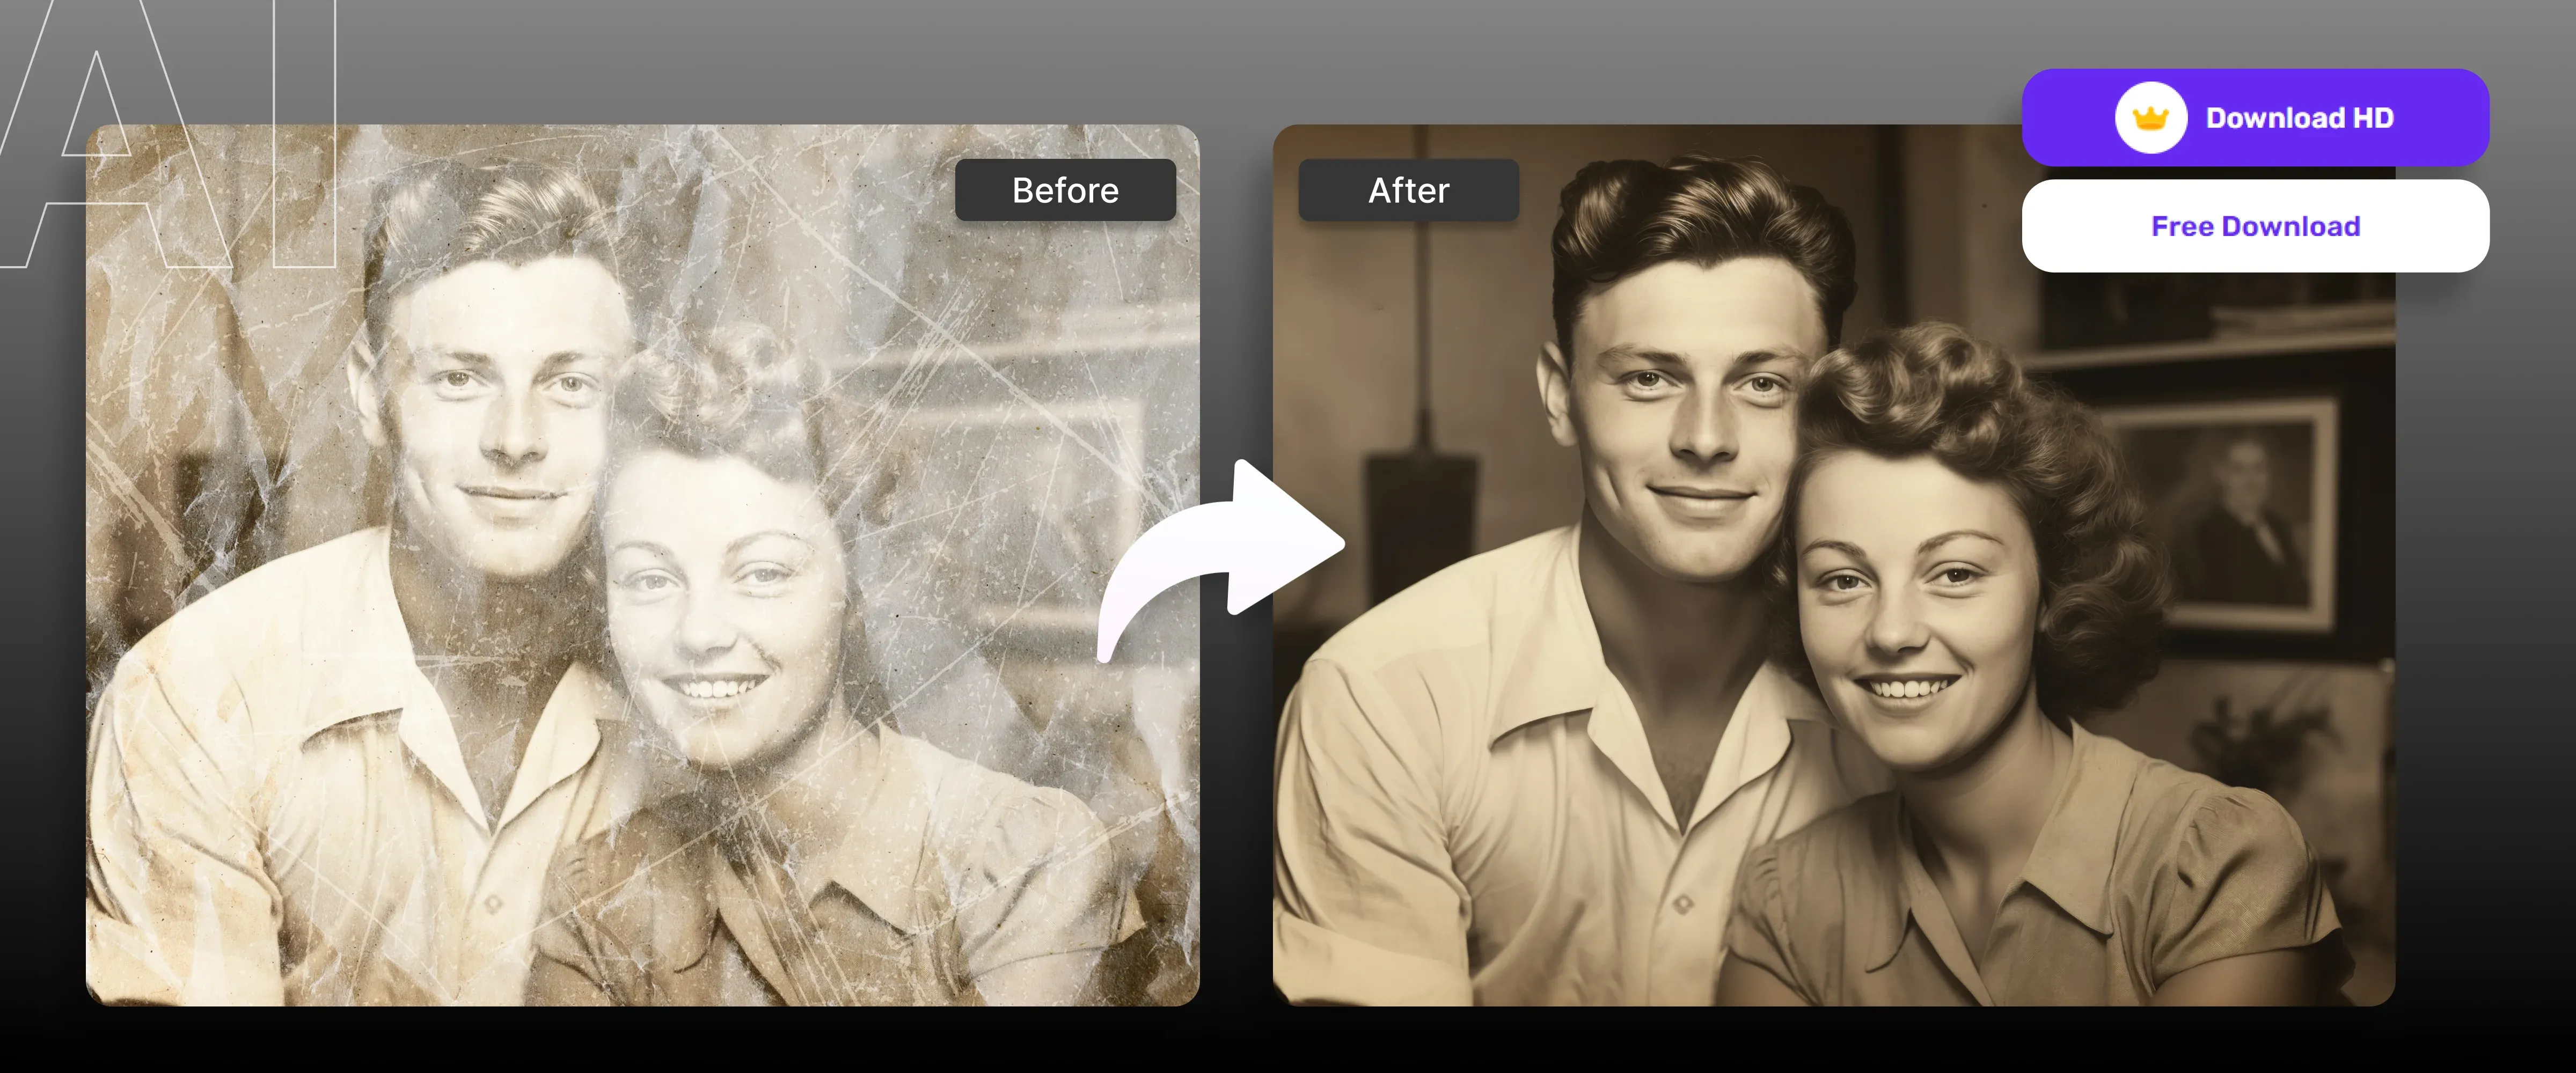 Relive your Old Memories: Phot.AI’s Old Photo Restoration cover